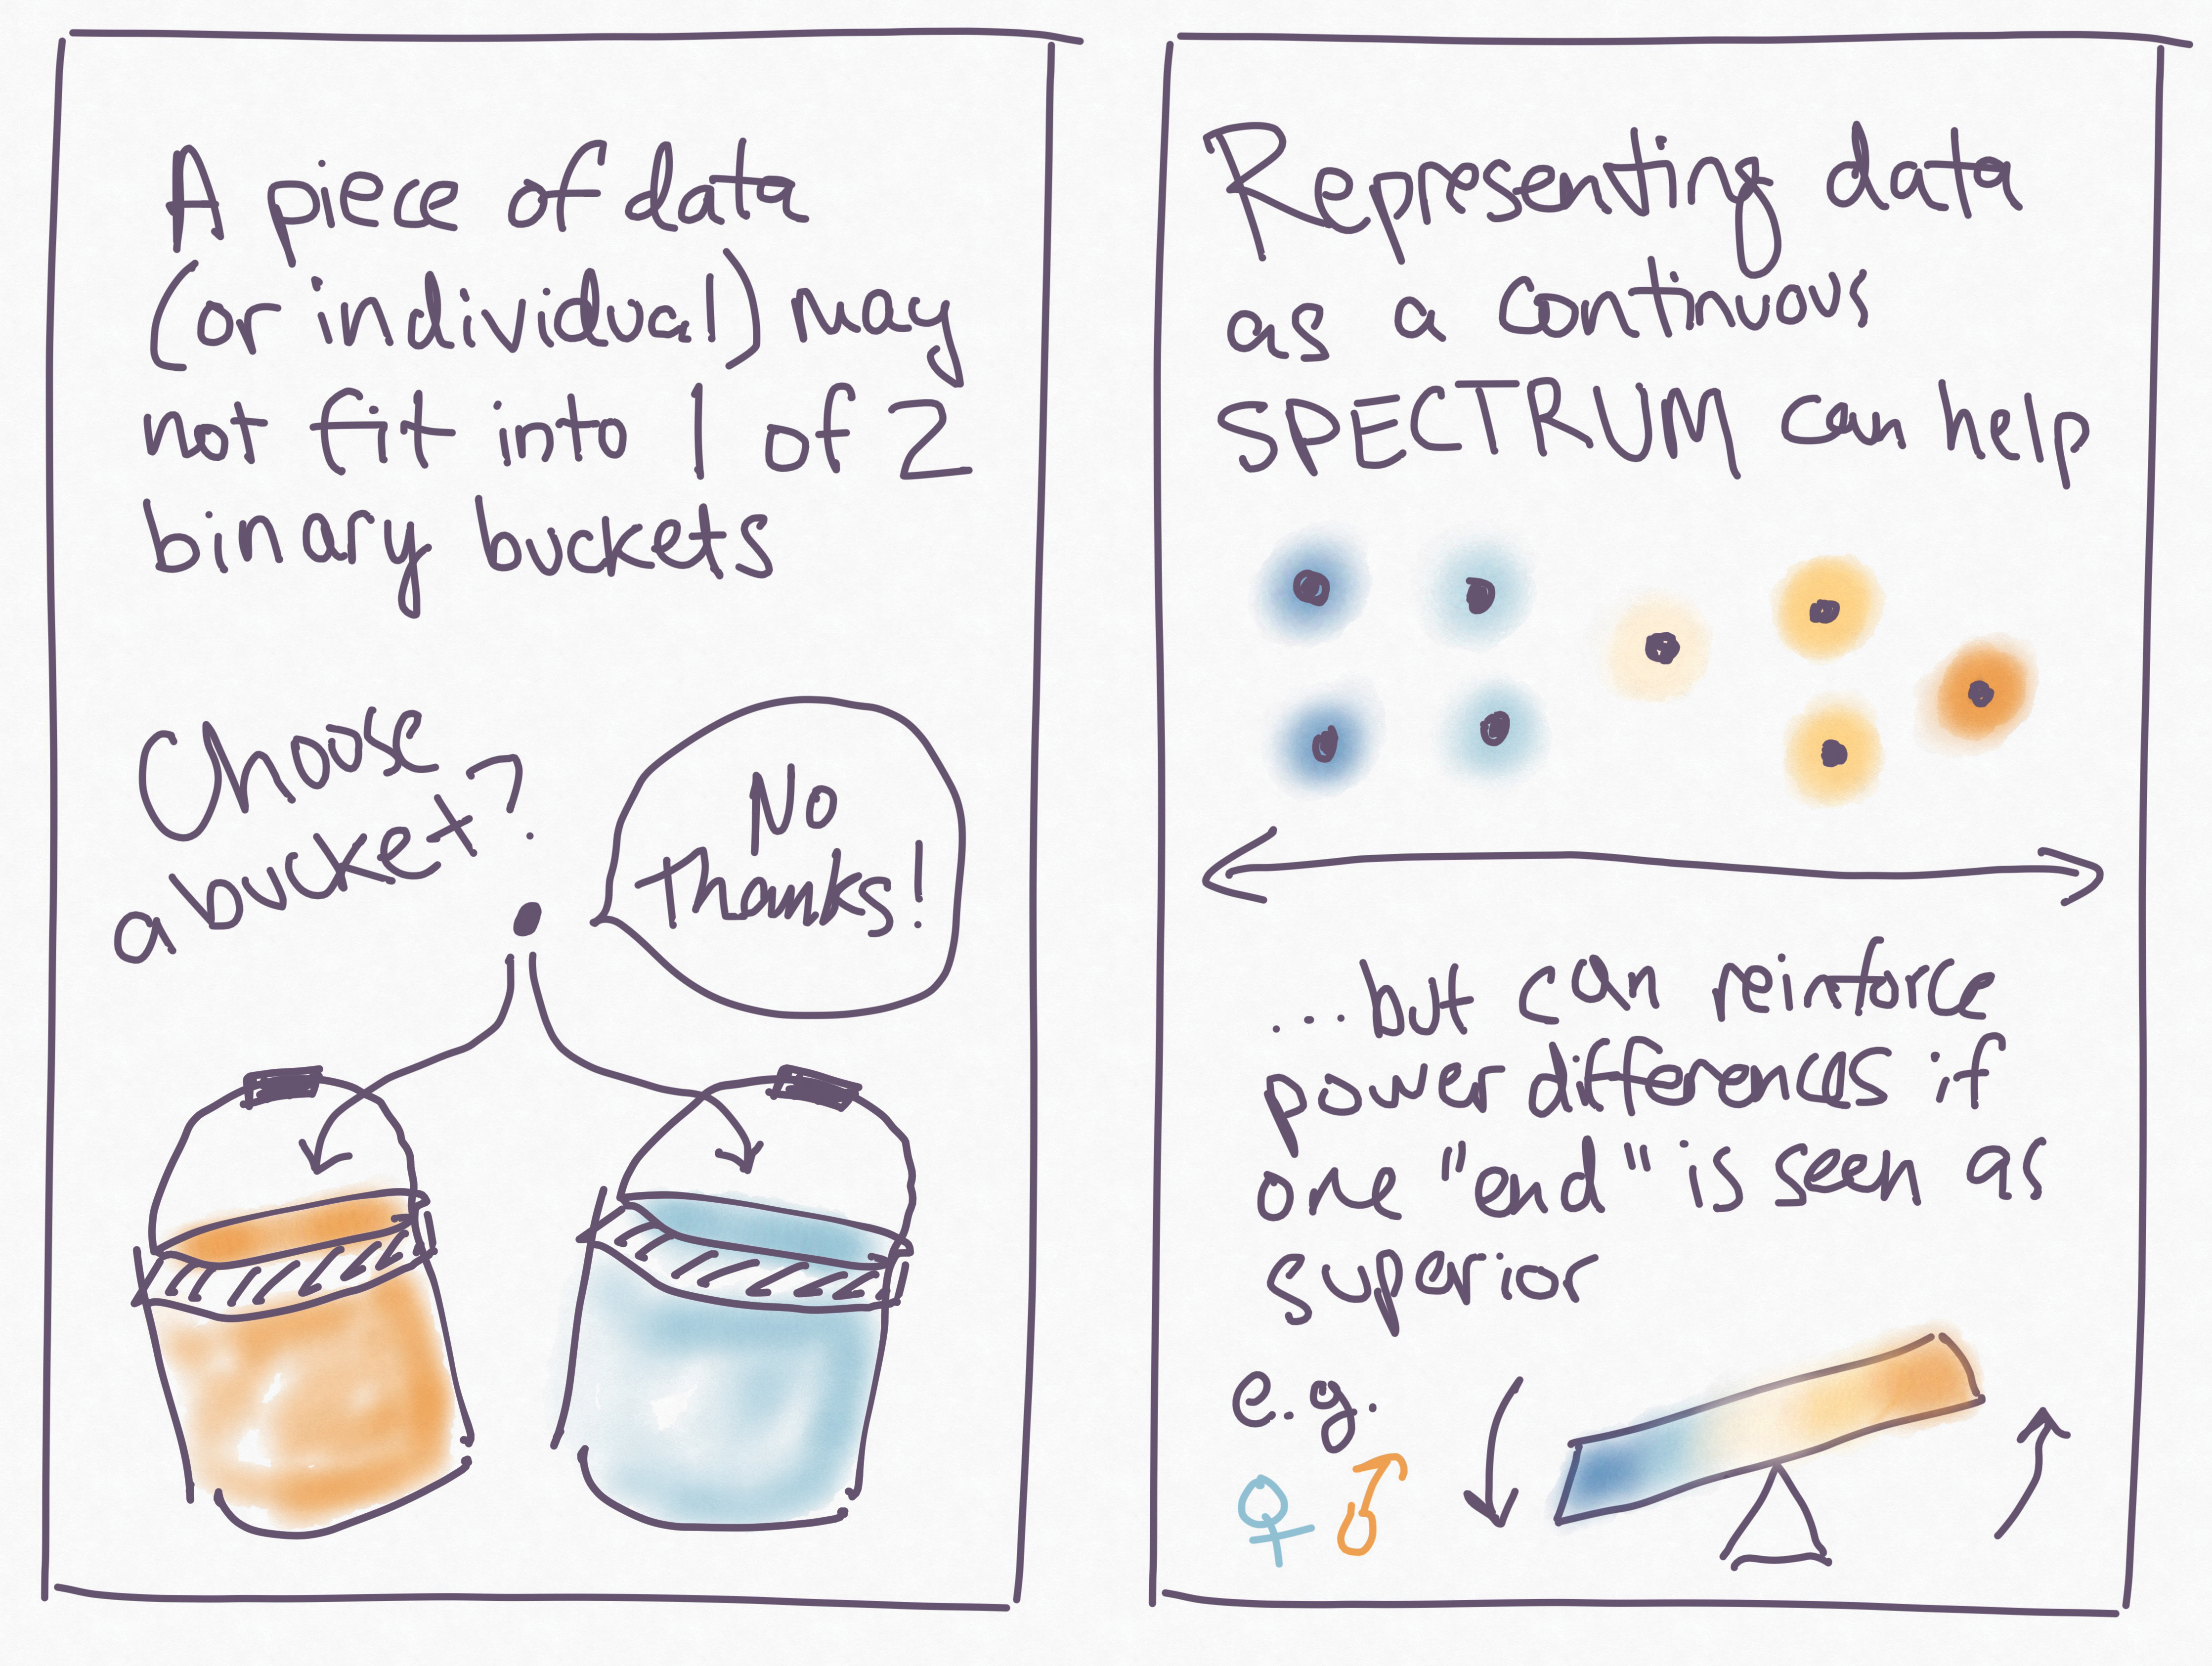 Panel 5: A piece of data (or individual) may not fit into 1 or 2 binary buckets.  There is an illustration of two different colored buckets with the words “choose a bucket”. A small dot is saying “no thanks” in a speech bubble. Panel 6: Representing data as a continuous spectrum can help…but can reinforce power differences if one “end” is seen as superior.  There are illustrations of colored dots on a spectrum and an off balance beam with a colored gradient representing male and female.